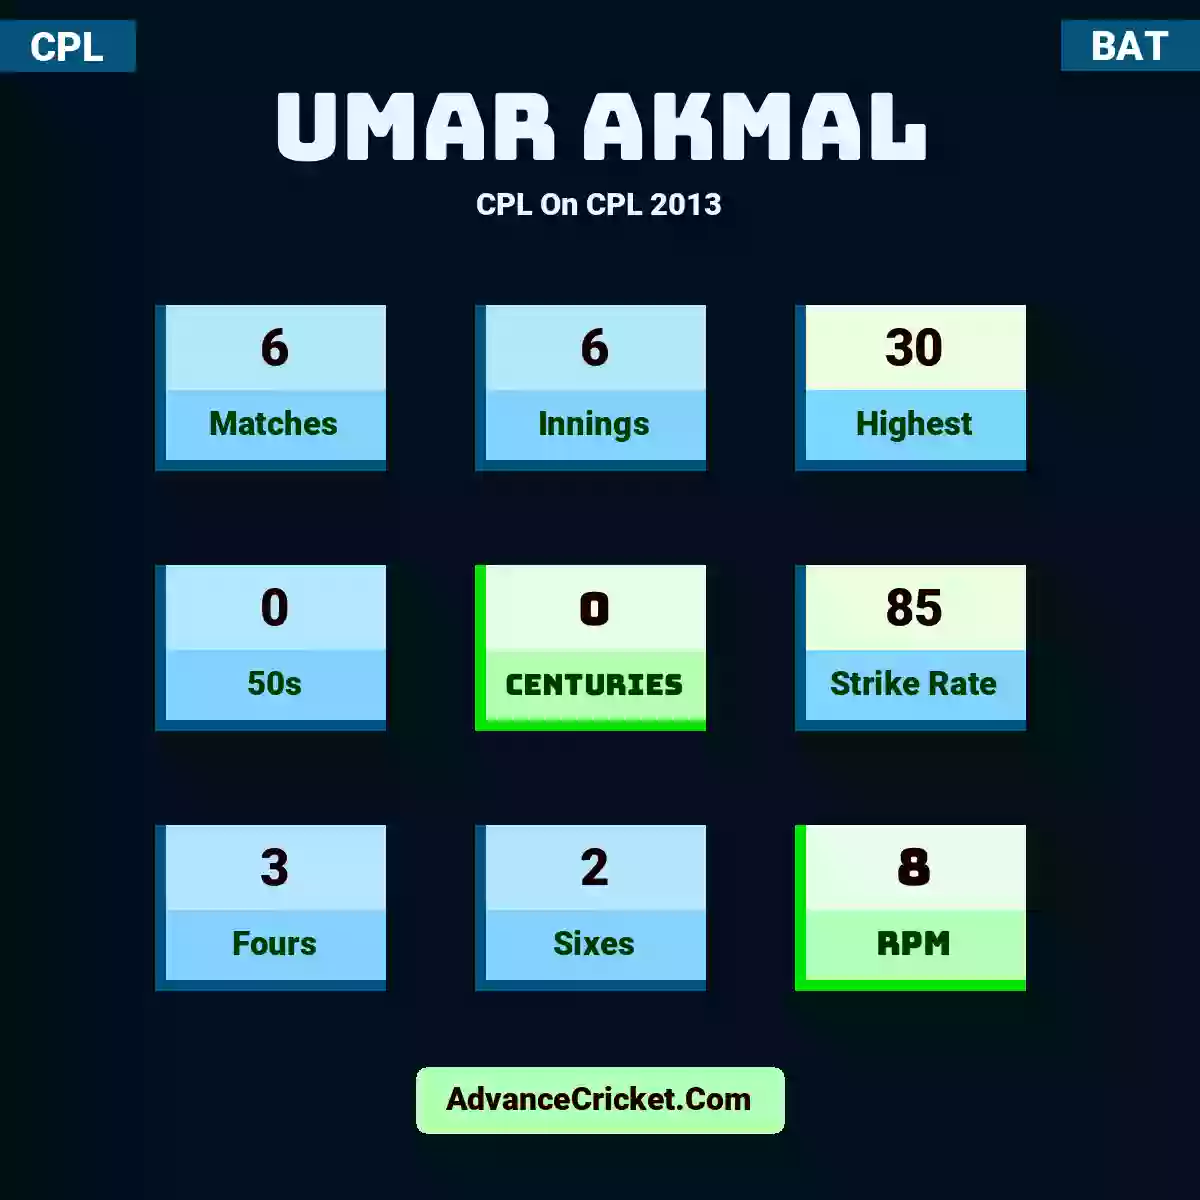 Umar Akmal CPL  On CPL 2013, Umar Akmal played 6 matches, scored 30 runs as highest, 0 half-centuries, and 0 centuries, with a strike rate of 85. U.Akmal hit 3 fours and 2 sixes, with an RPM of 8.